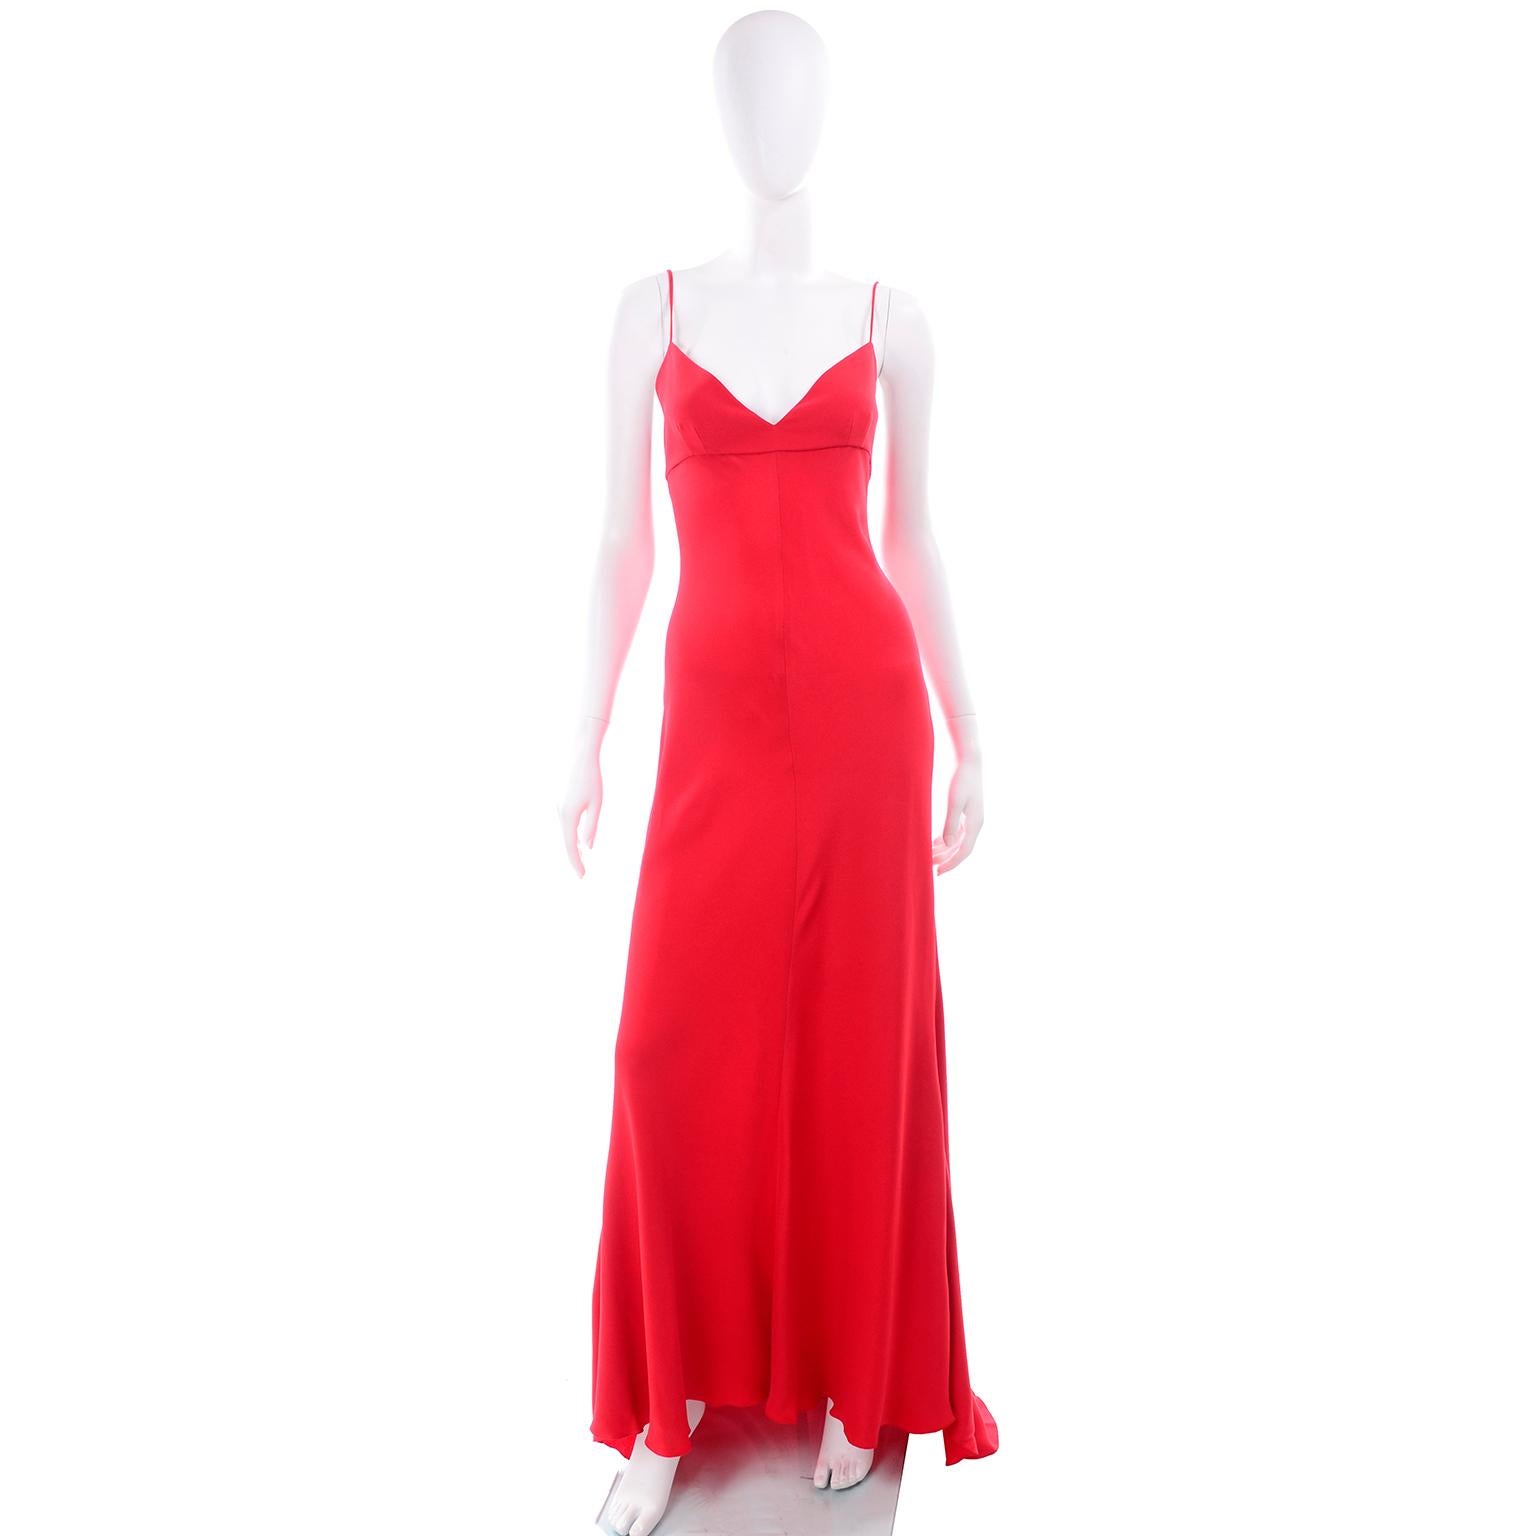 This is an absolutely gorgeous Valentino red vintage slip dress. This beautiful silk evening gown has spaghetti straps, an empire waist, and closes with a metal zipper and hook and eye on that center back seam. The dress has a slight train and is